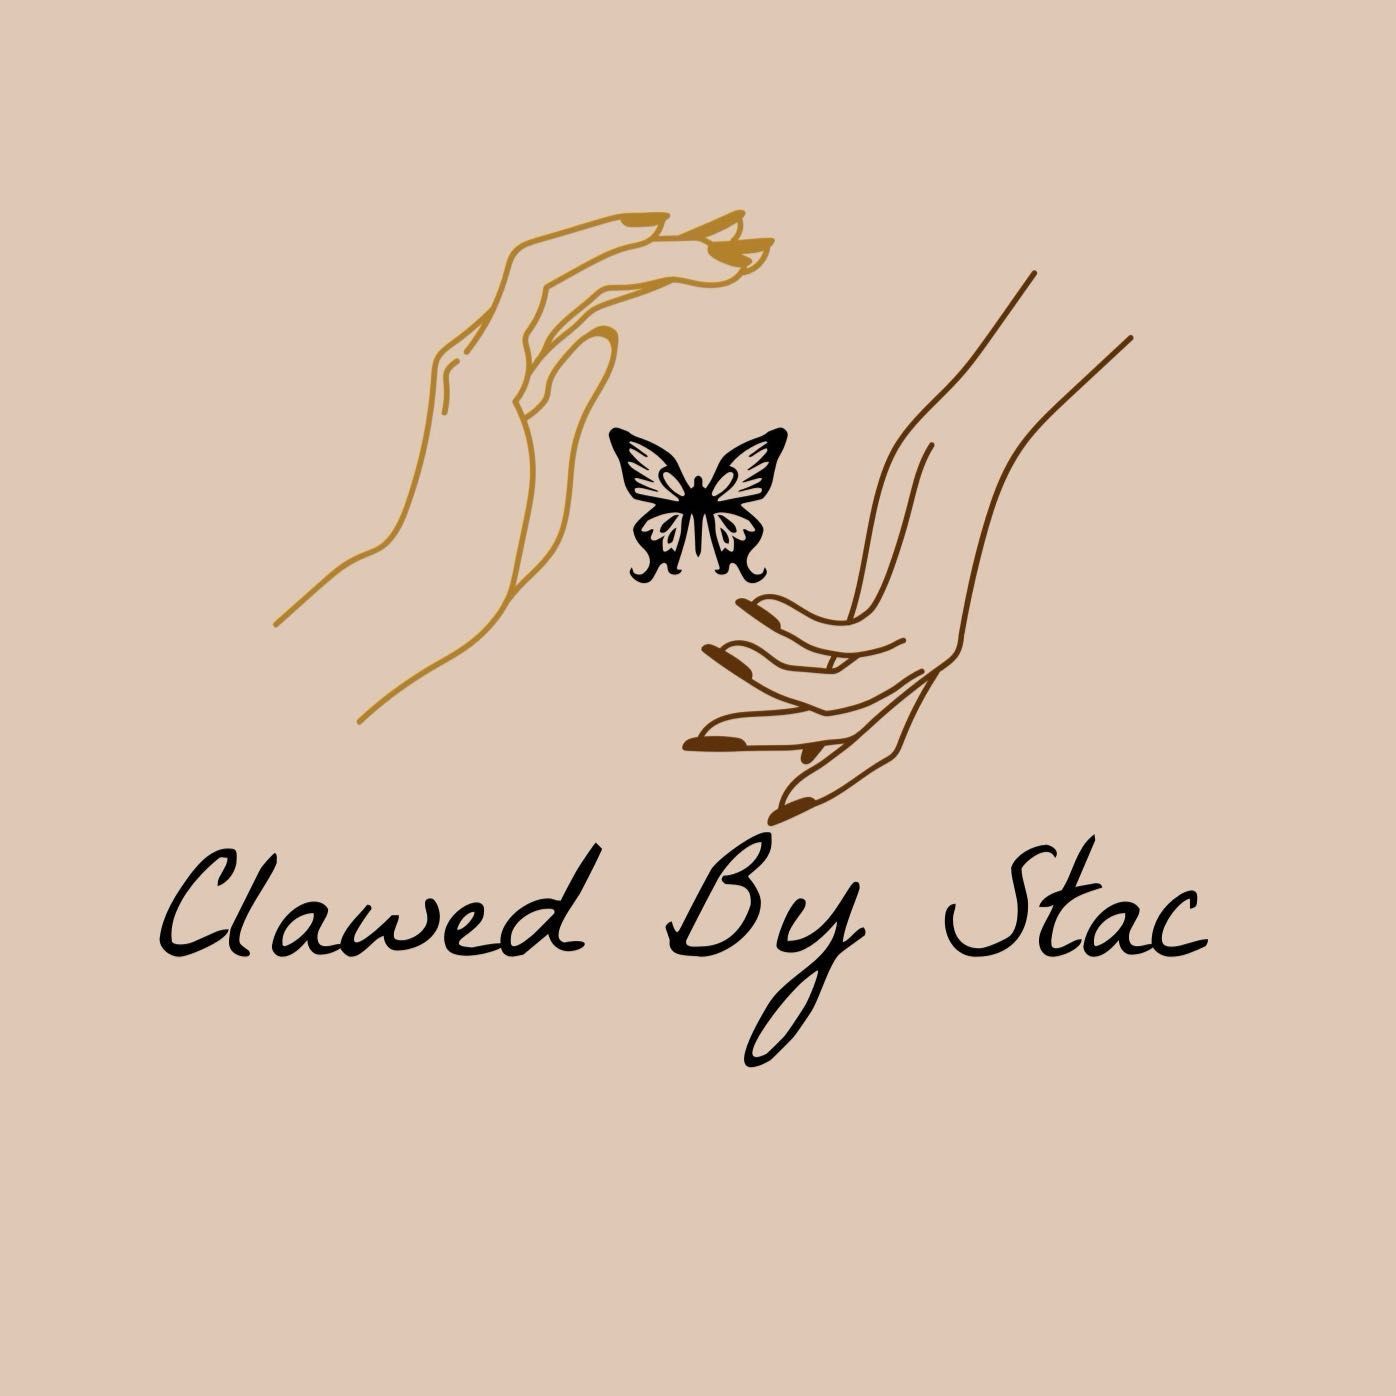 Get Clawed by Stac, 3290 memorial drive, Suite B3, Decatur, 30032